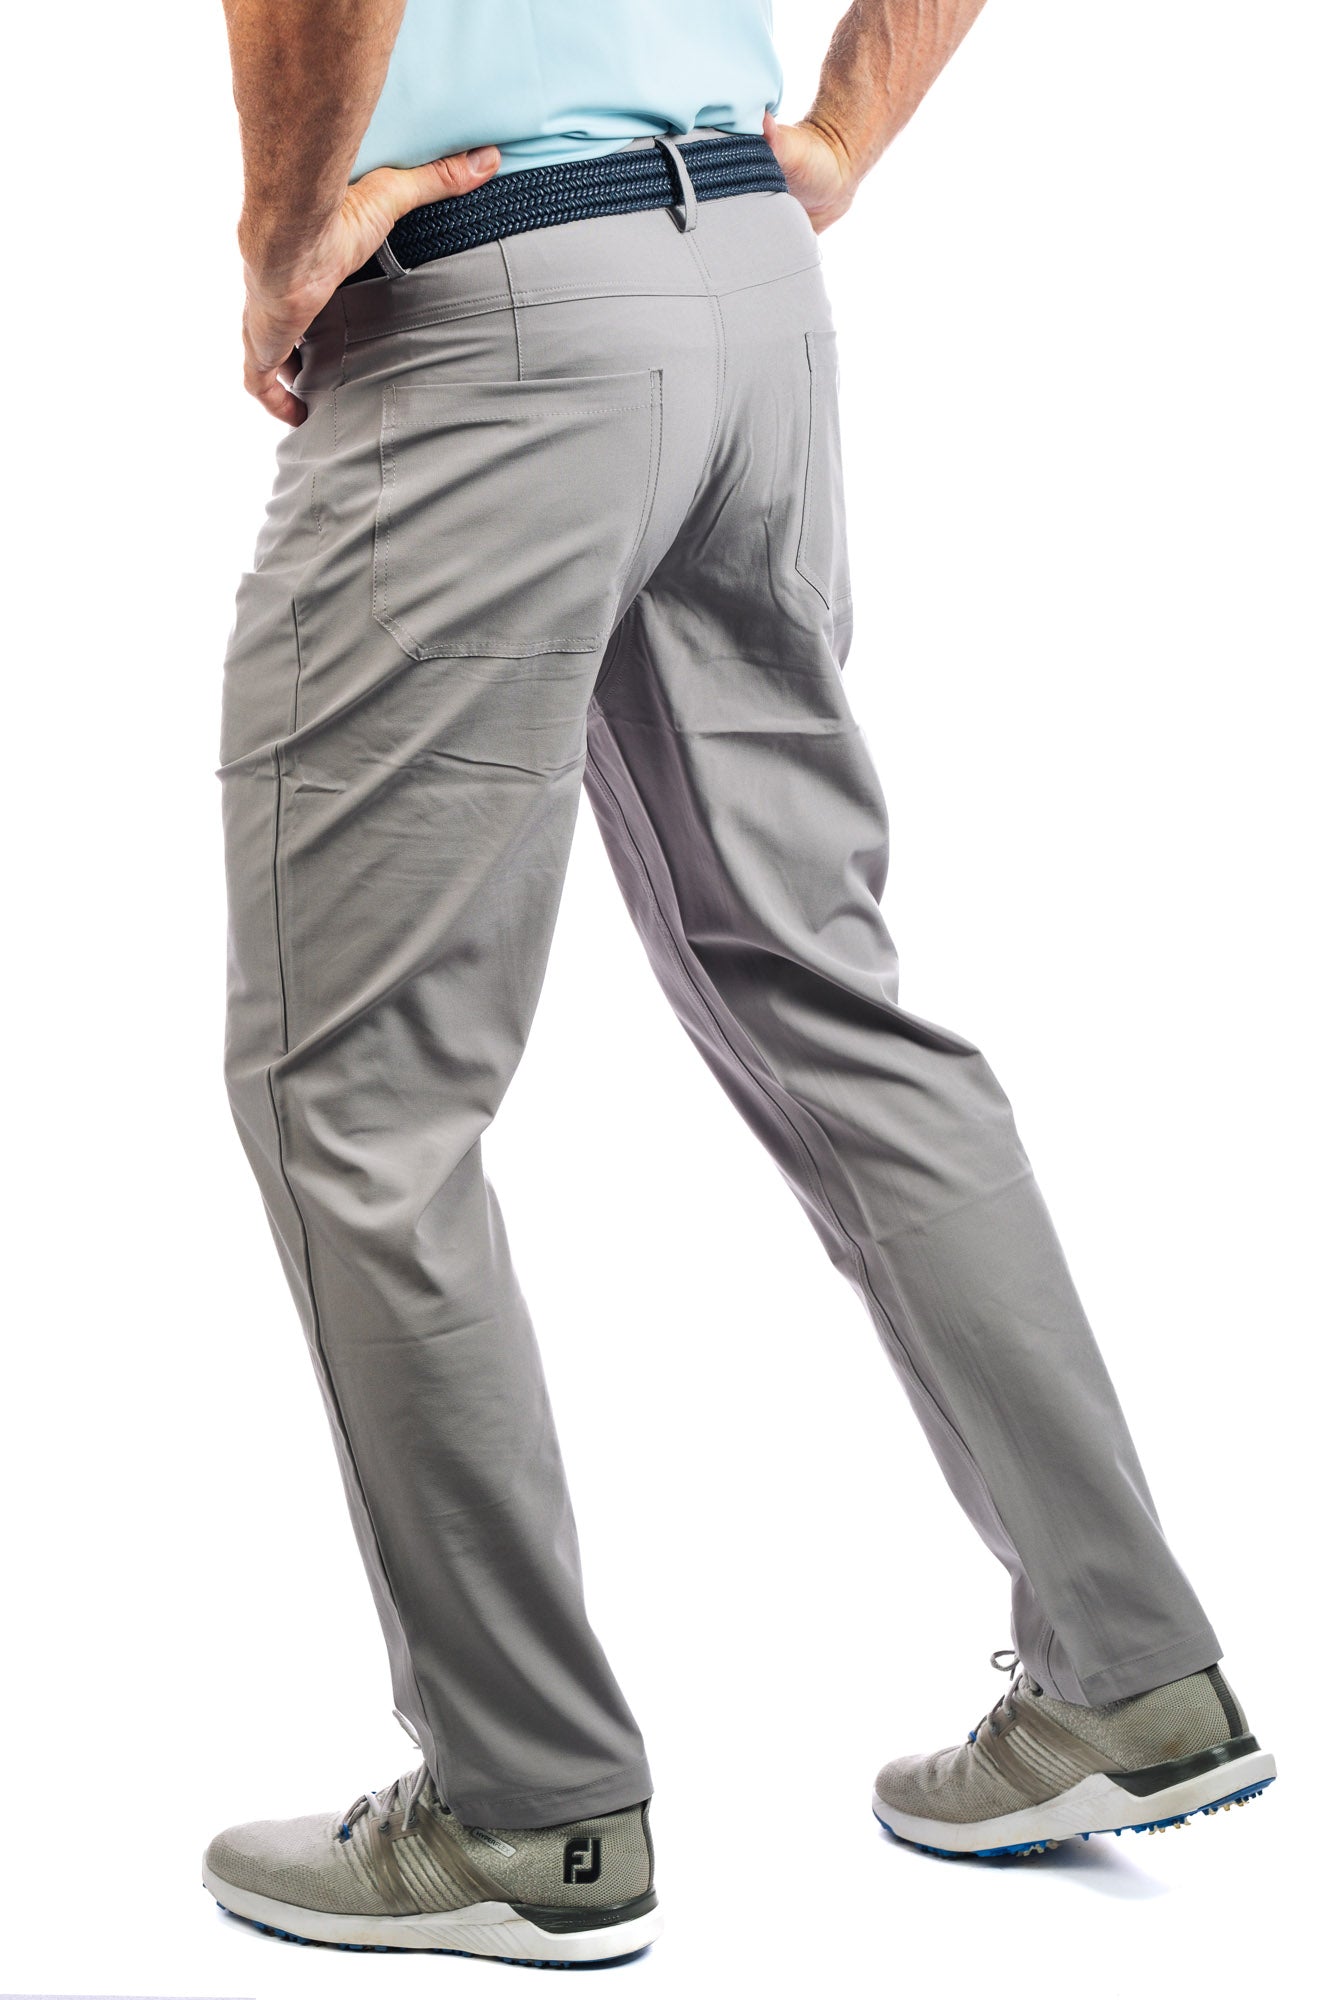 Backside of our model wearing our Concrete golf pants. 